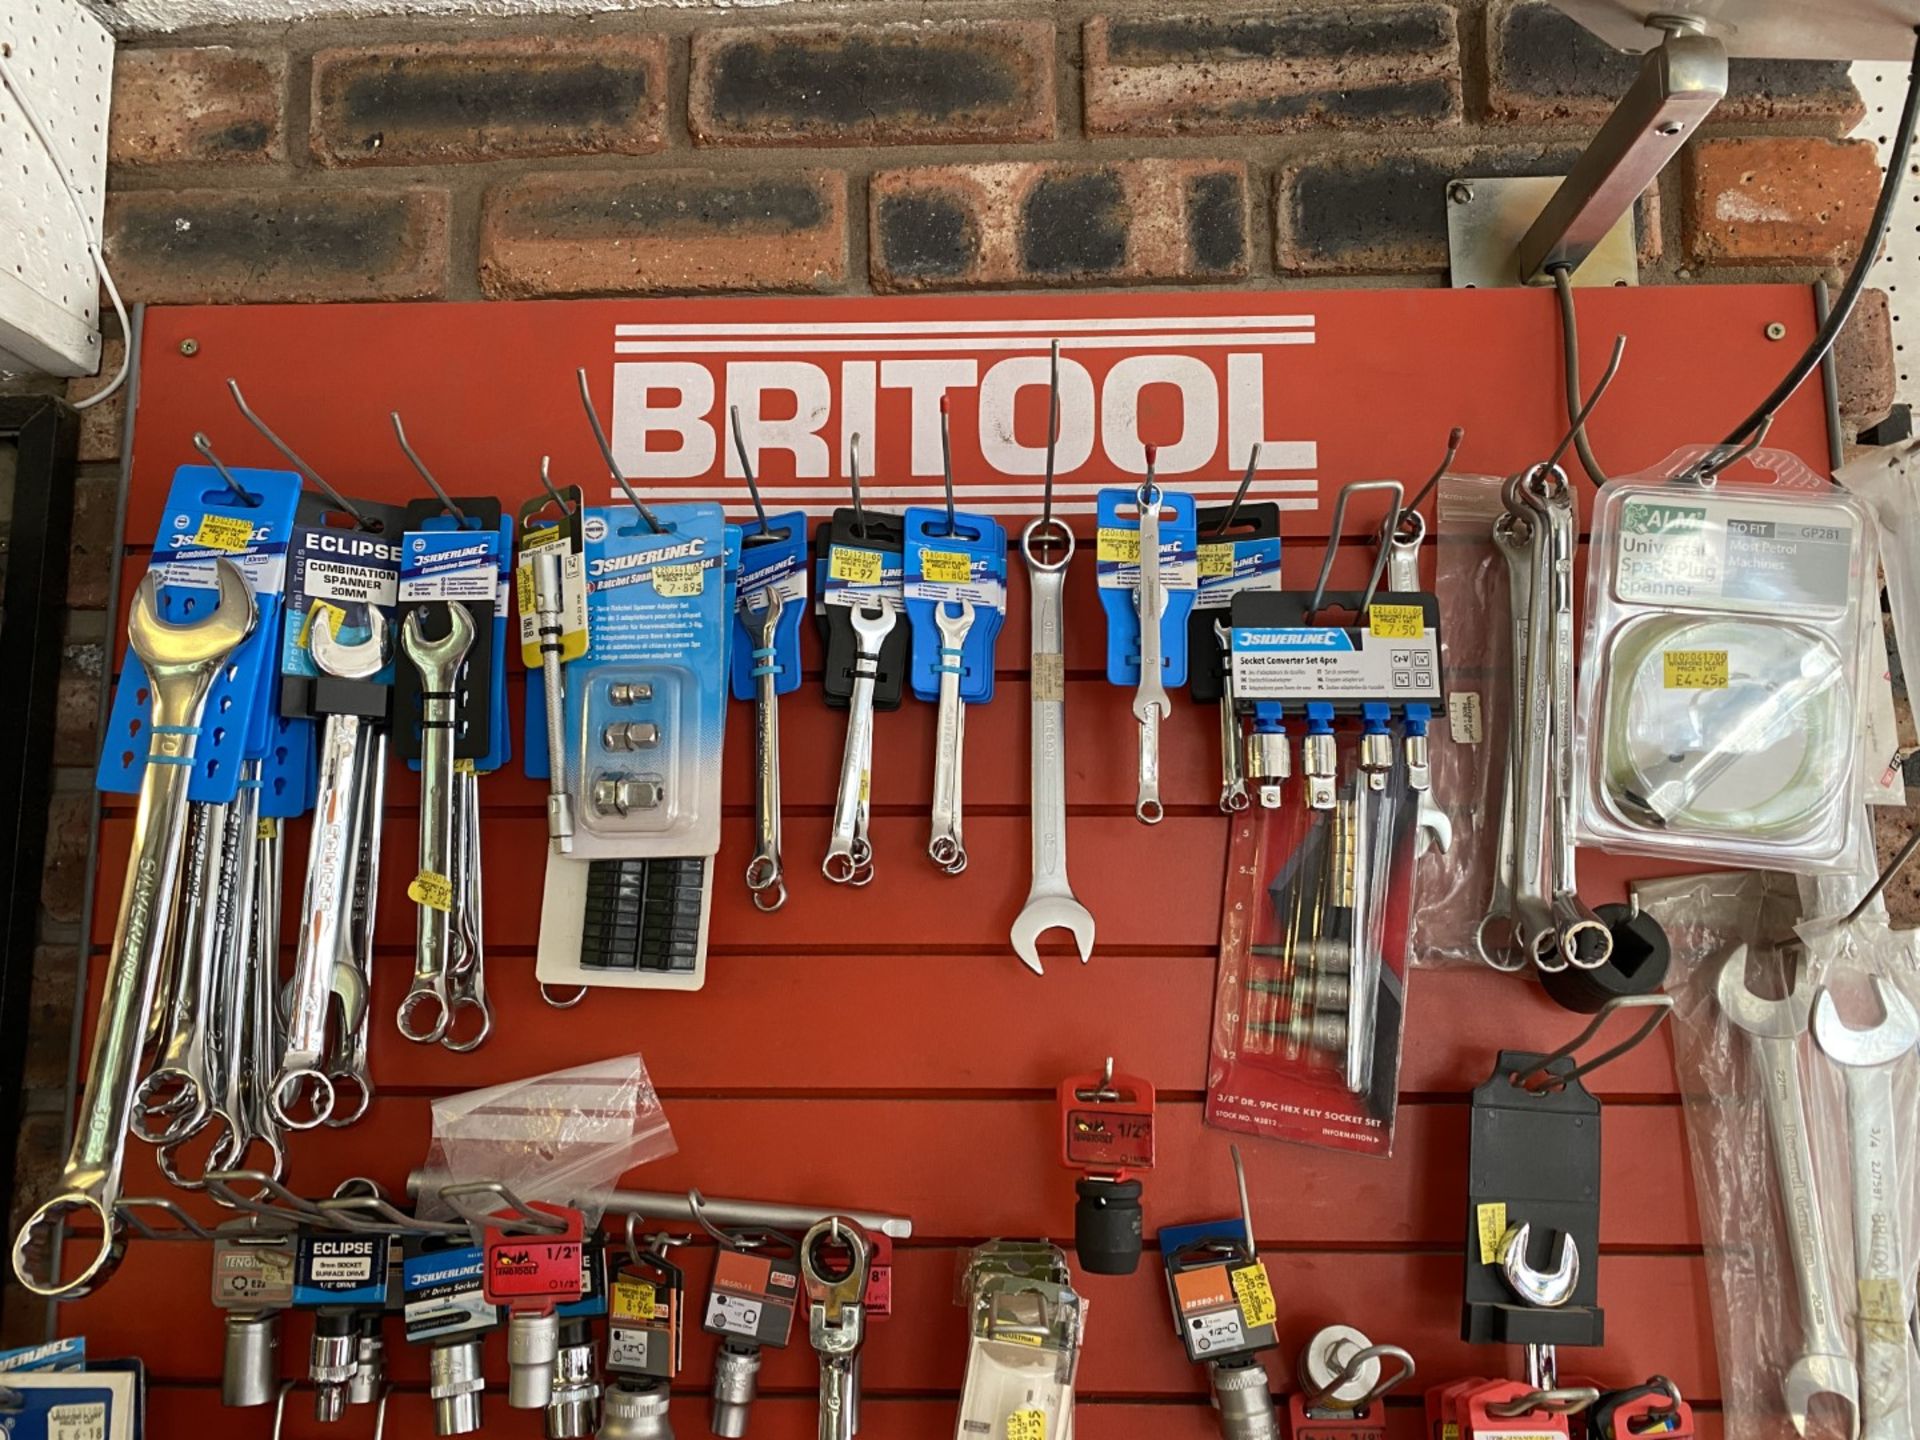 Britool wall display and contents including spanners etc. - Image 2 of 4